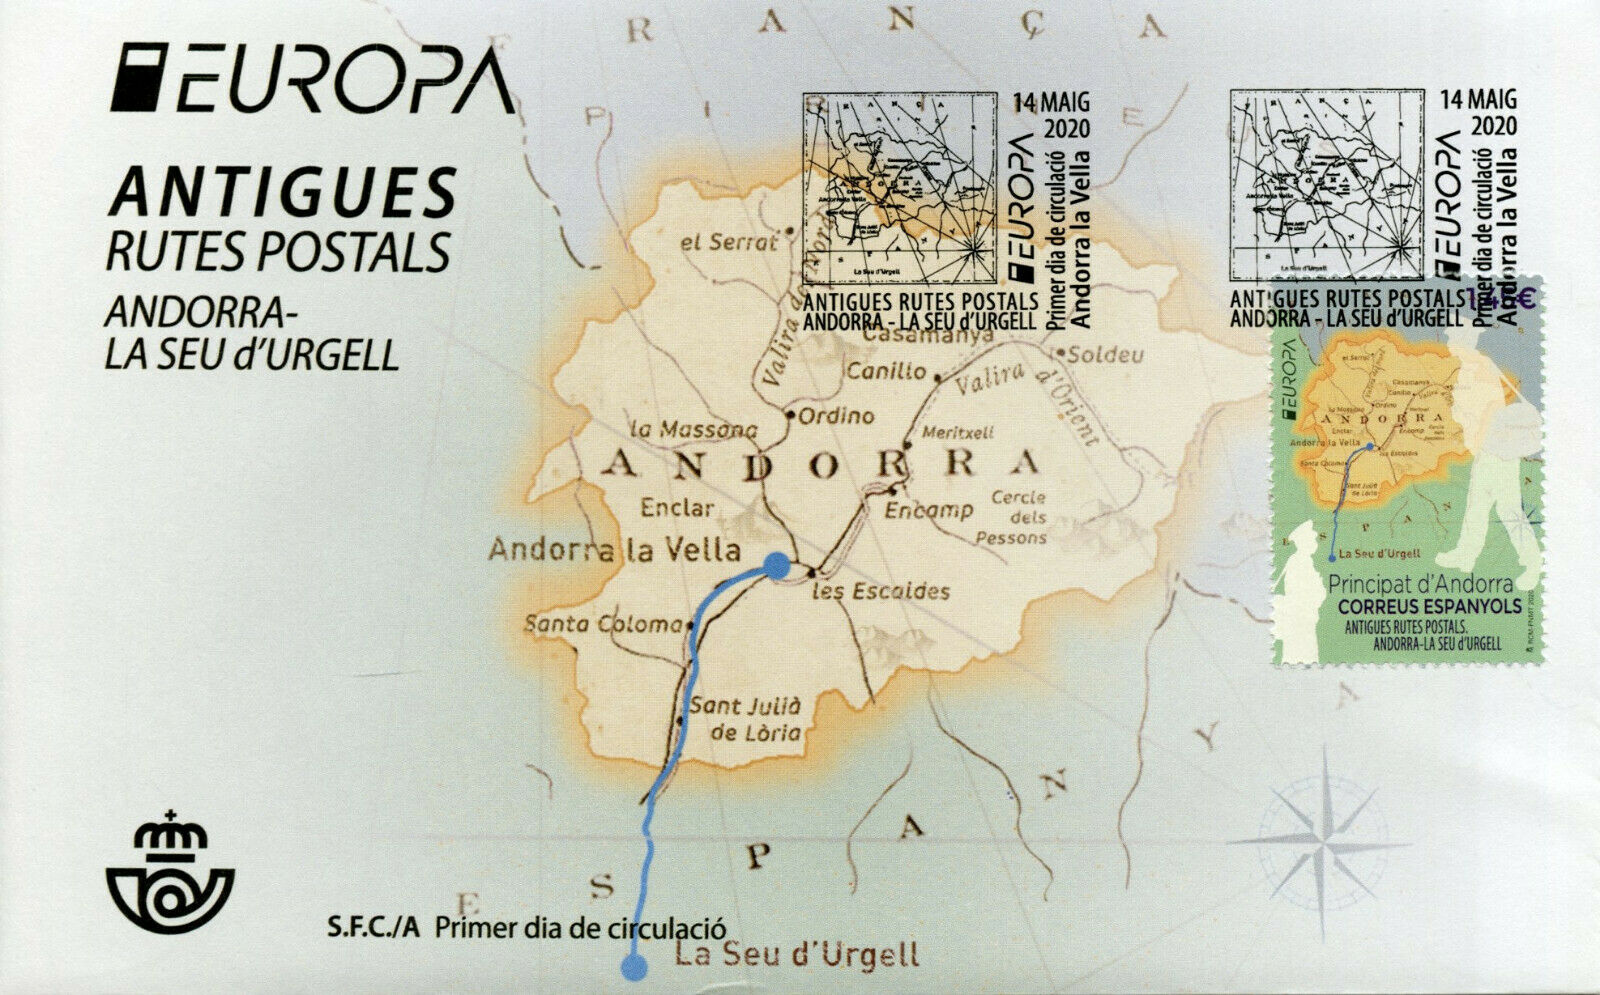 Spanish Andorra Europa Stamps 2020 FDC Ancient Postal Routes Maps Postman 1v Set